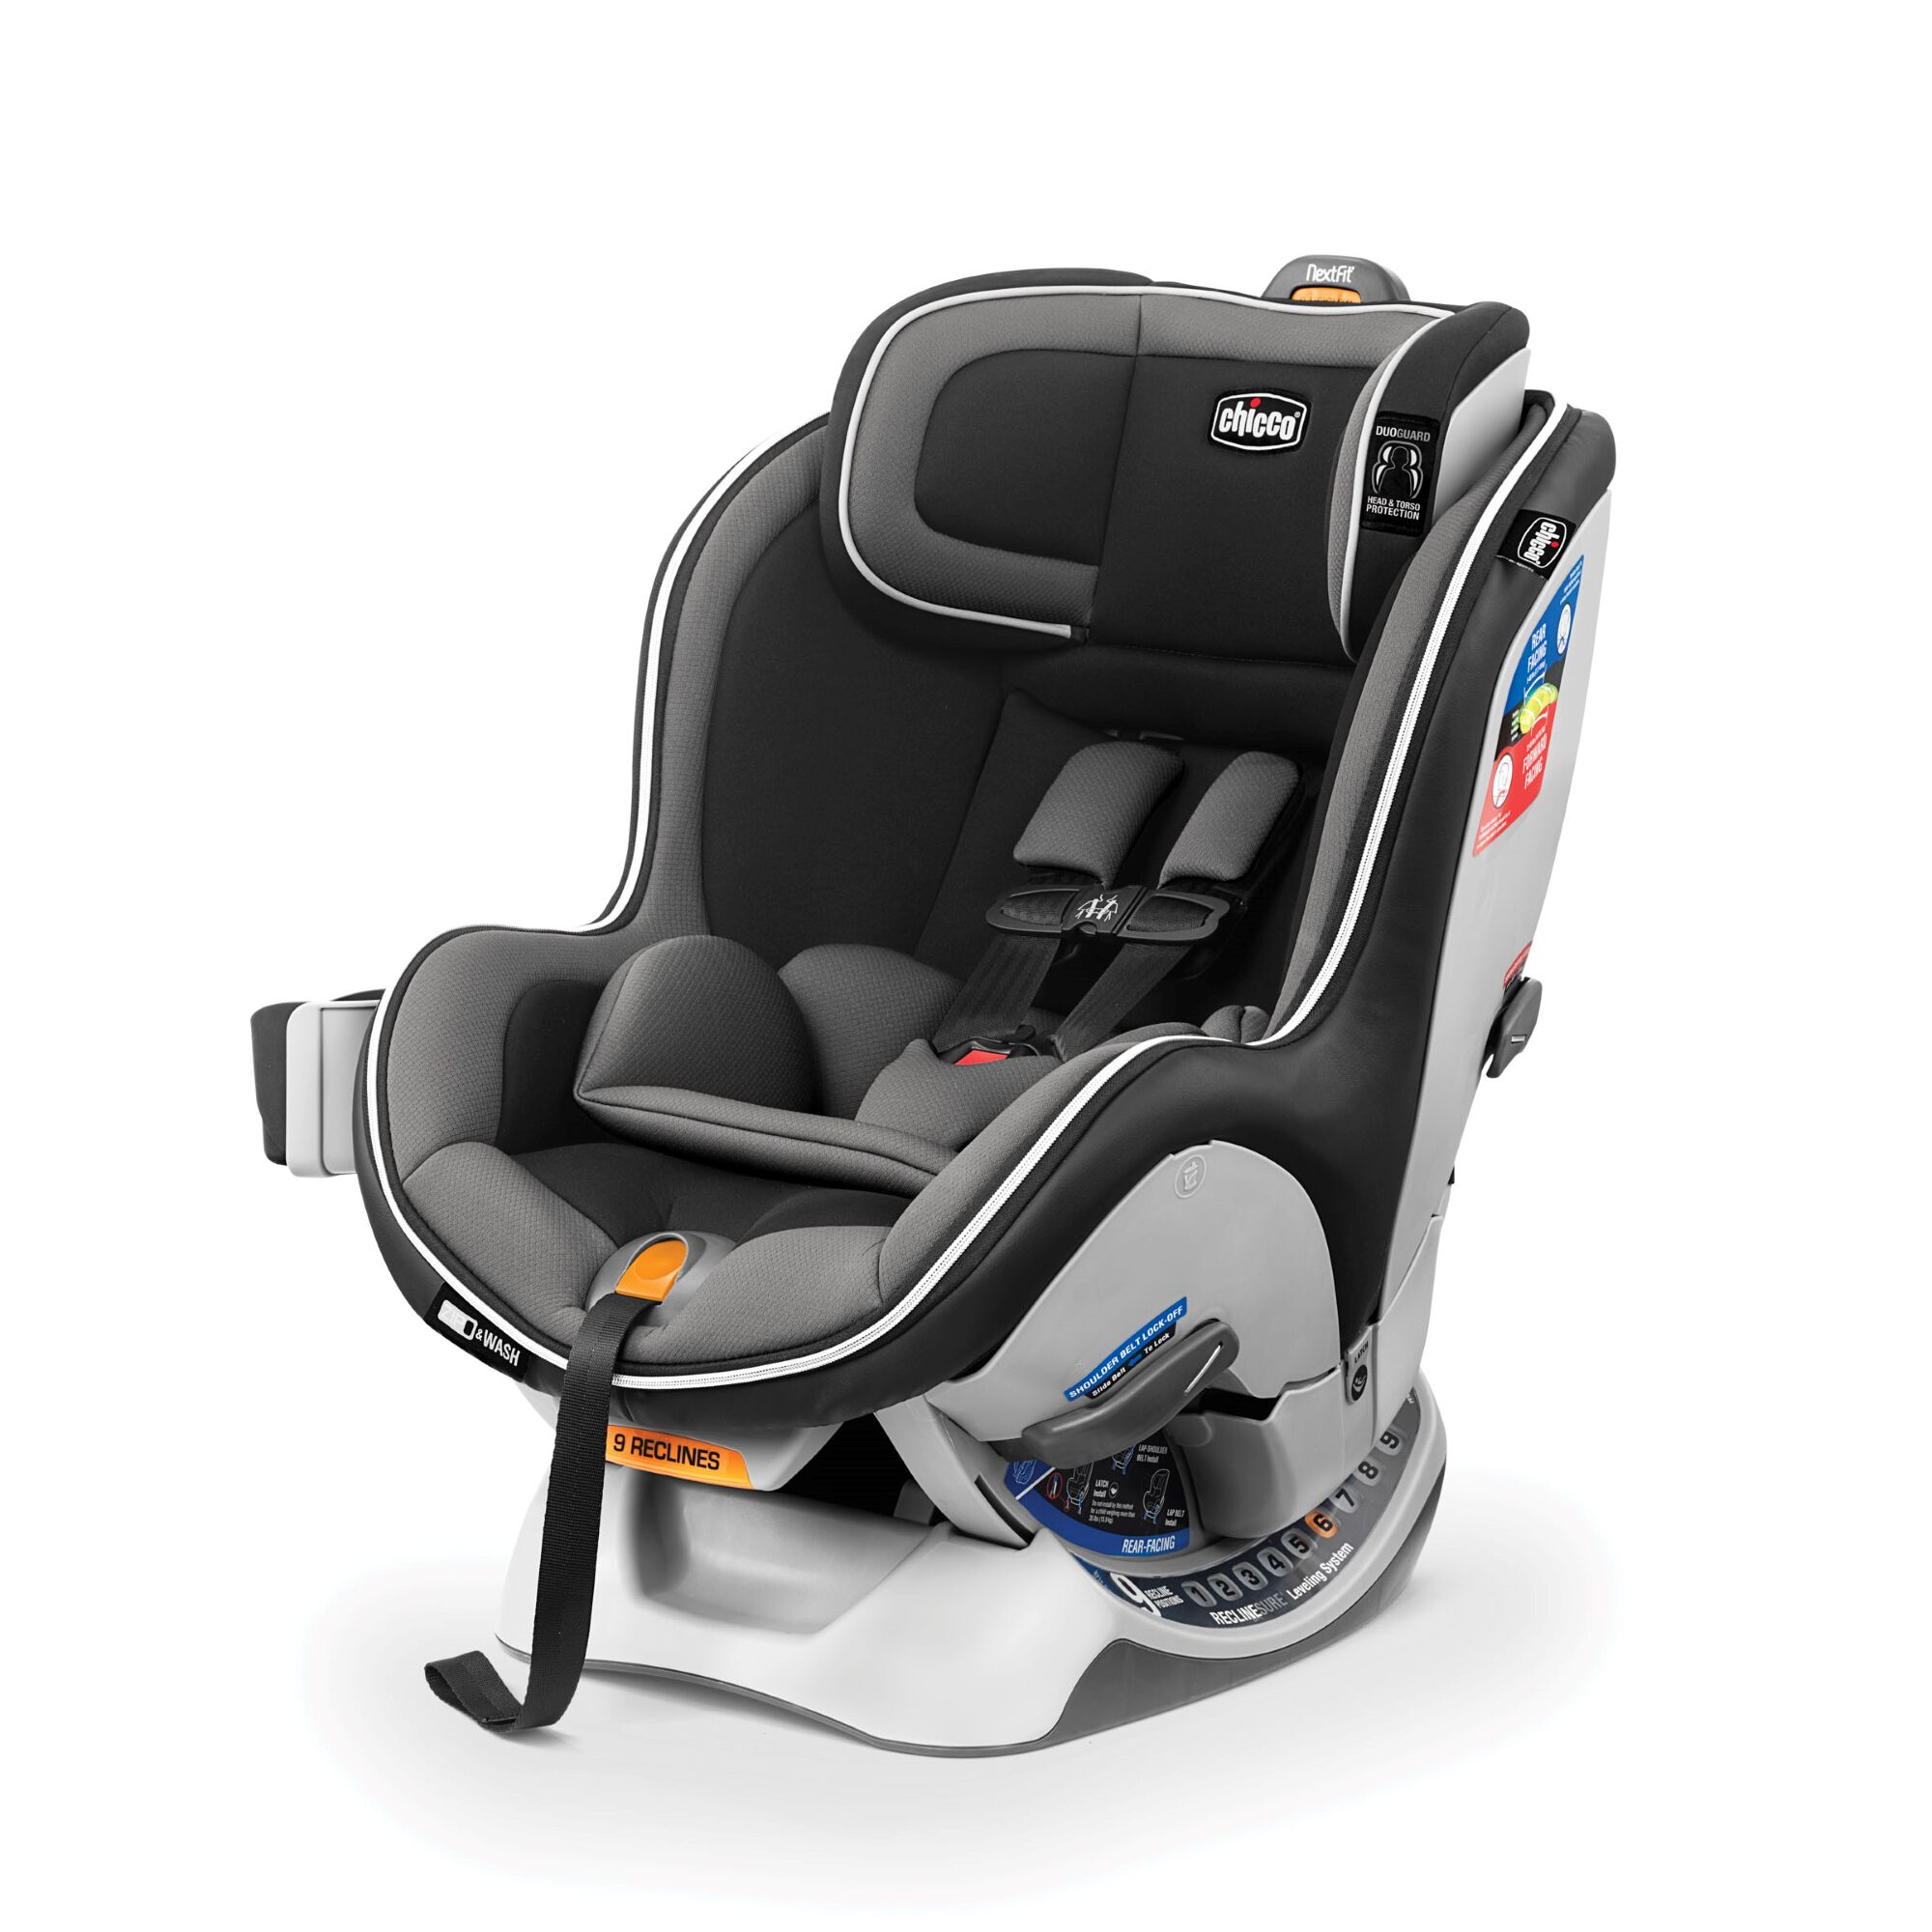 Chicco chicco car seat 